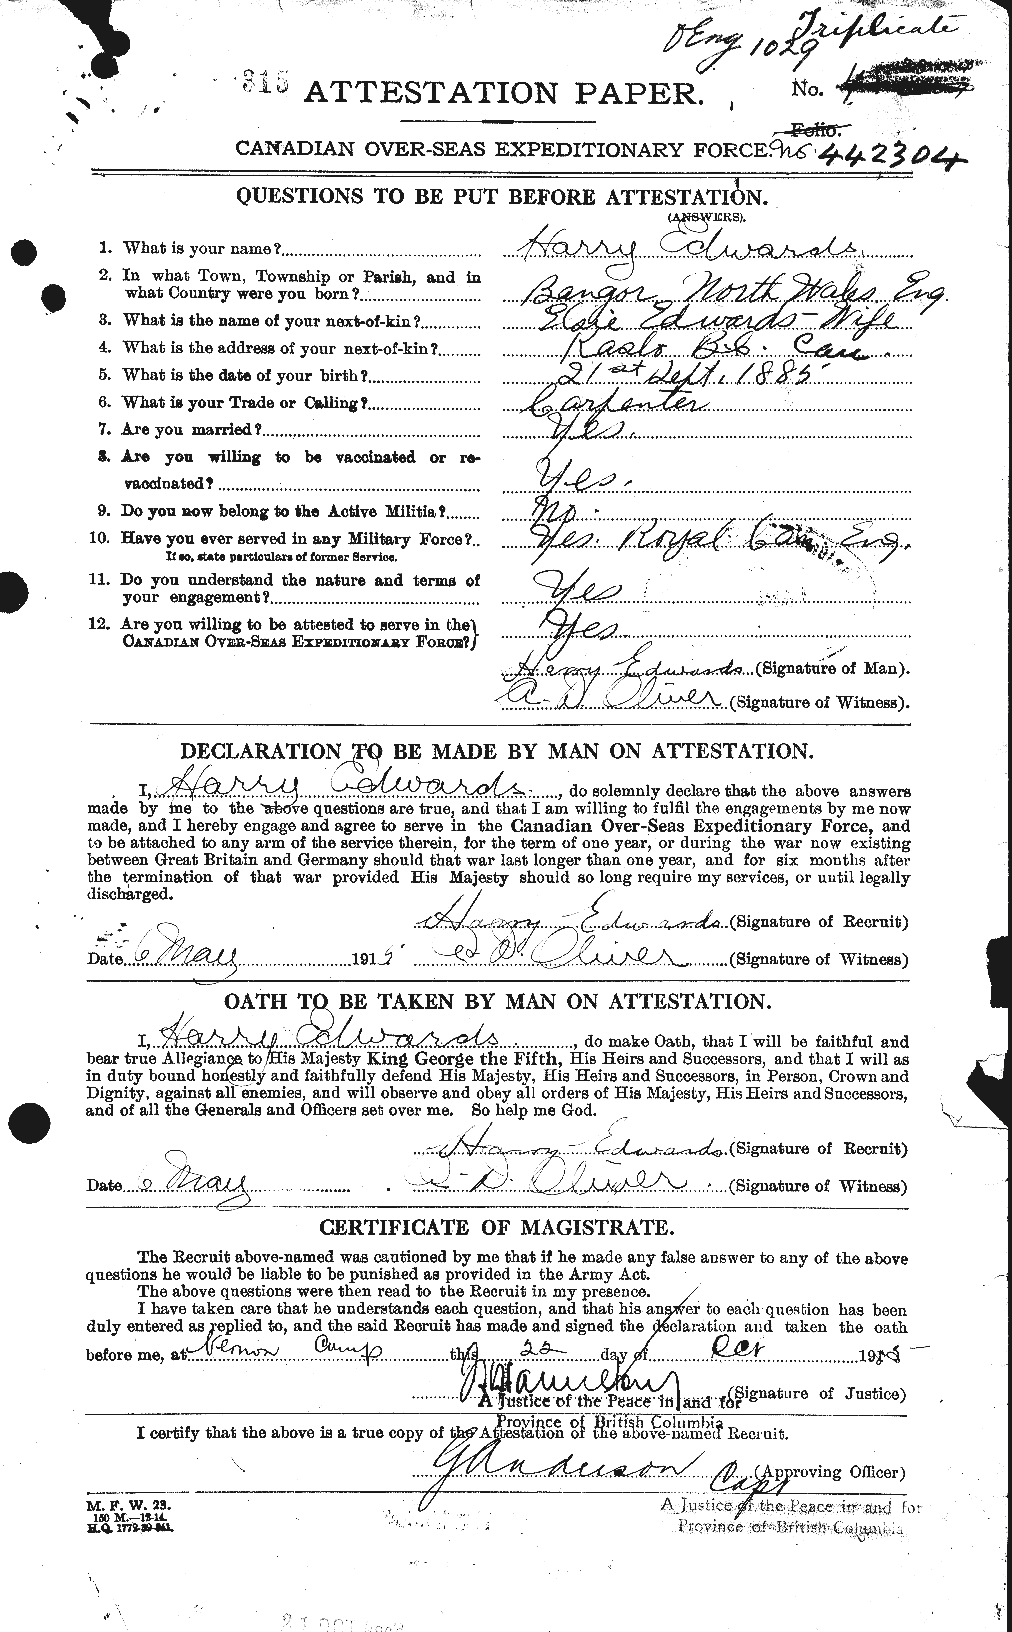 Personnel Records of the First World War - CEF 309736a